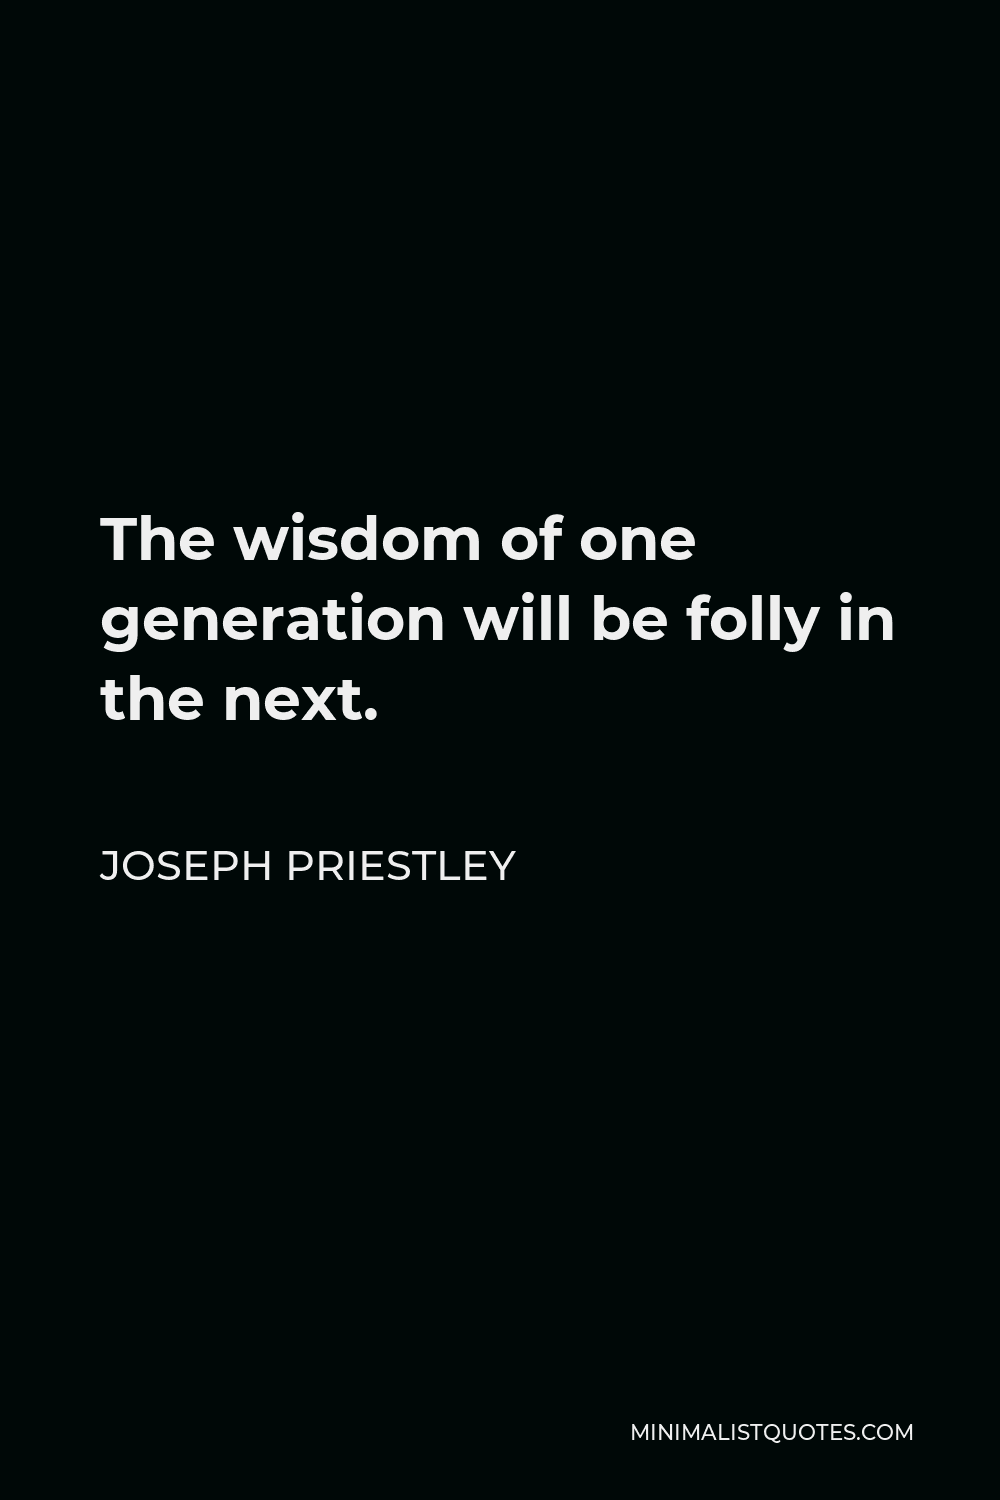 Joseph Priestley Quote - The wisdom of one generation will be folly in the next.